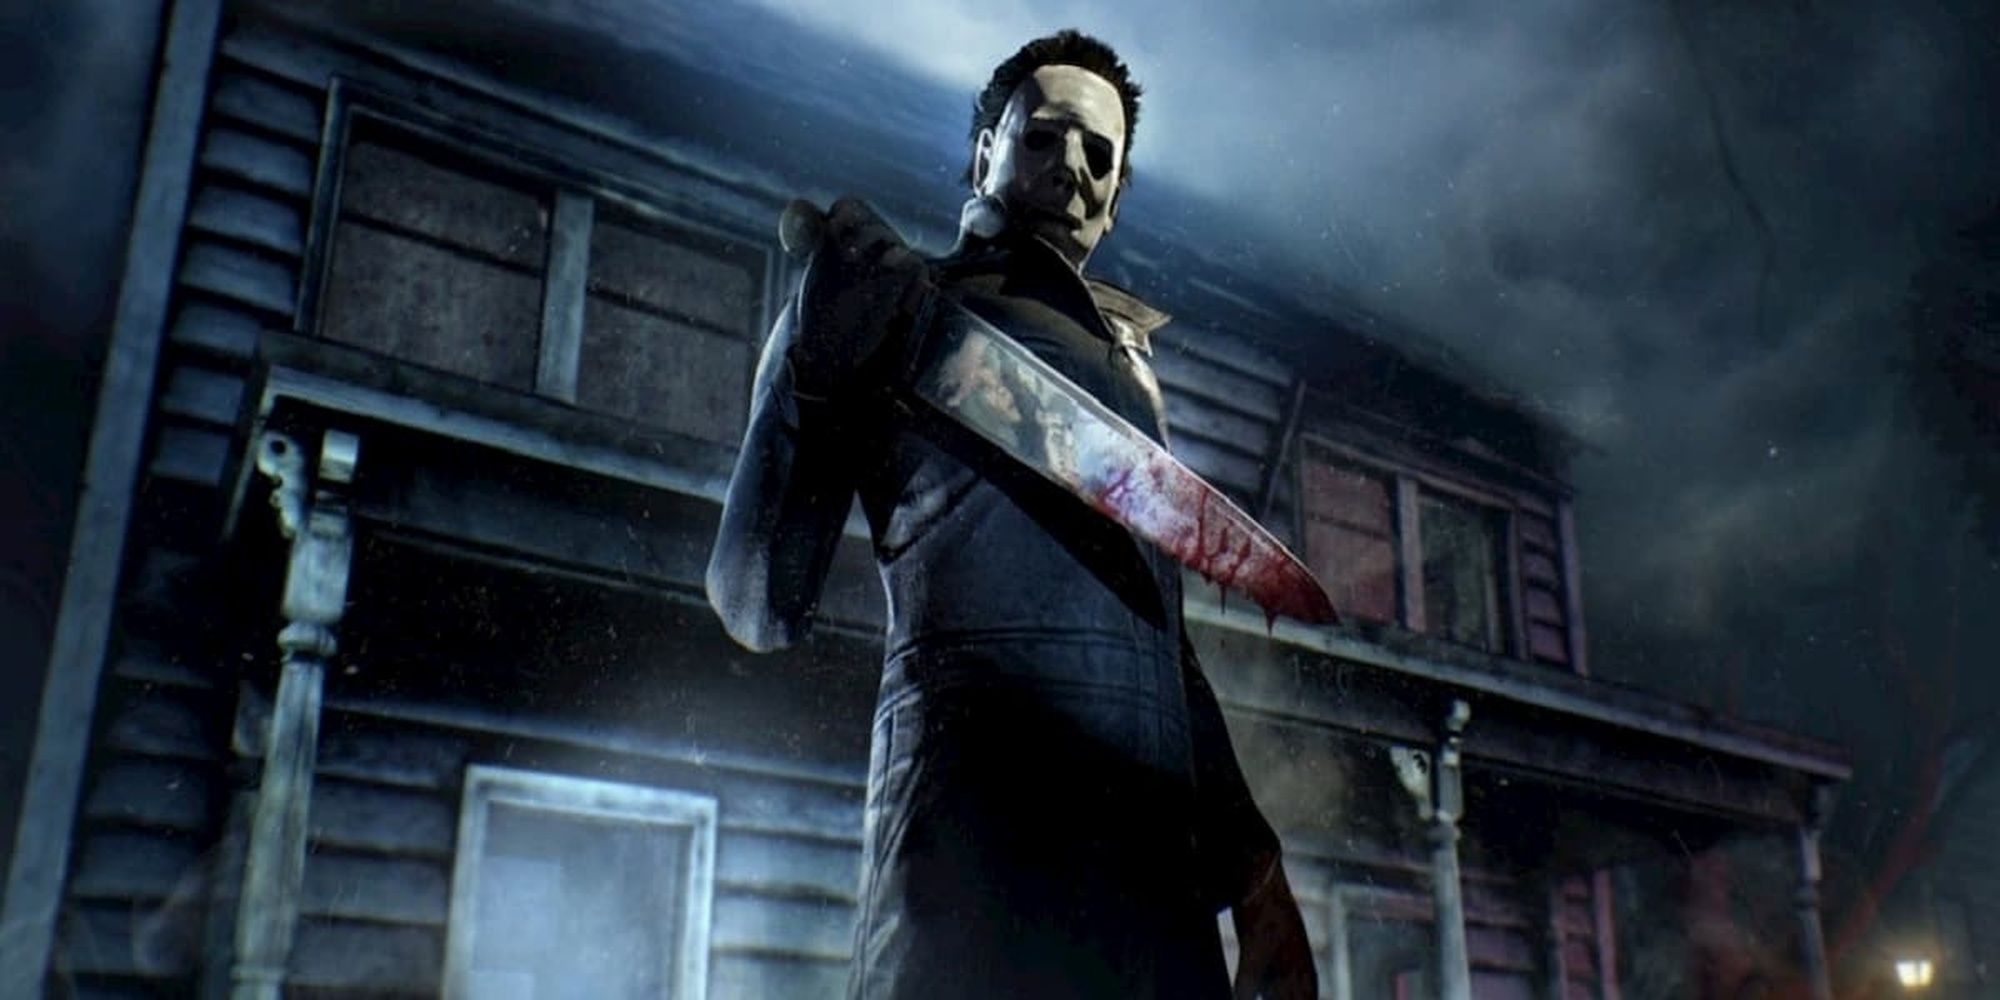 Dead By Daylight: Michael Myers Character Model holding a bloody knife